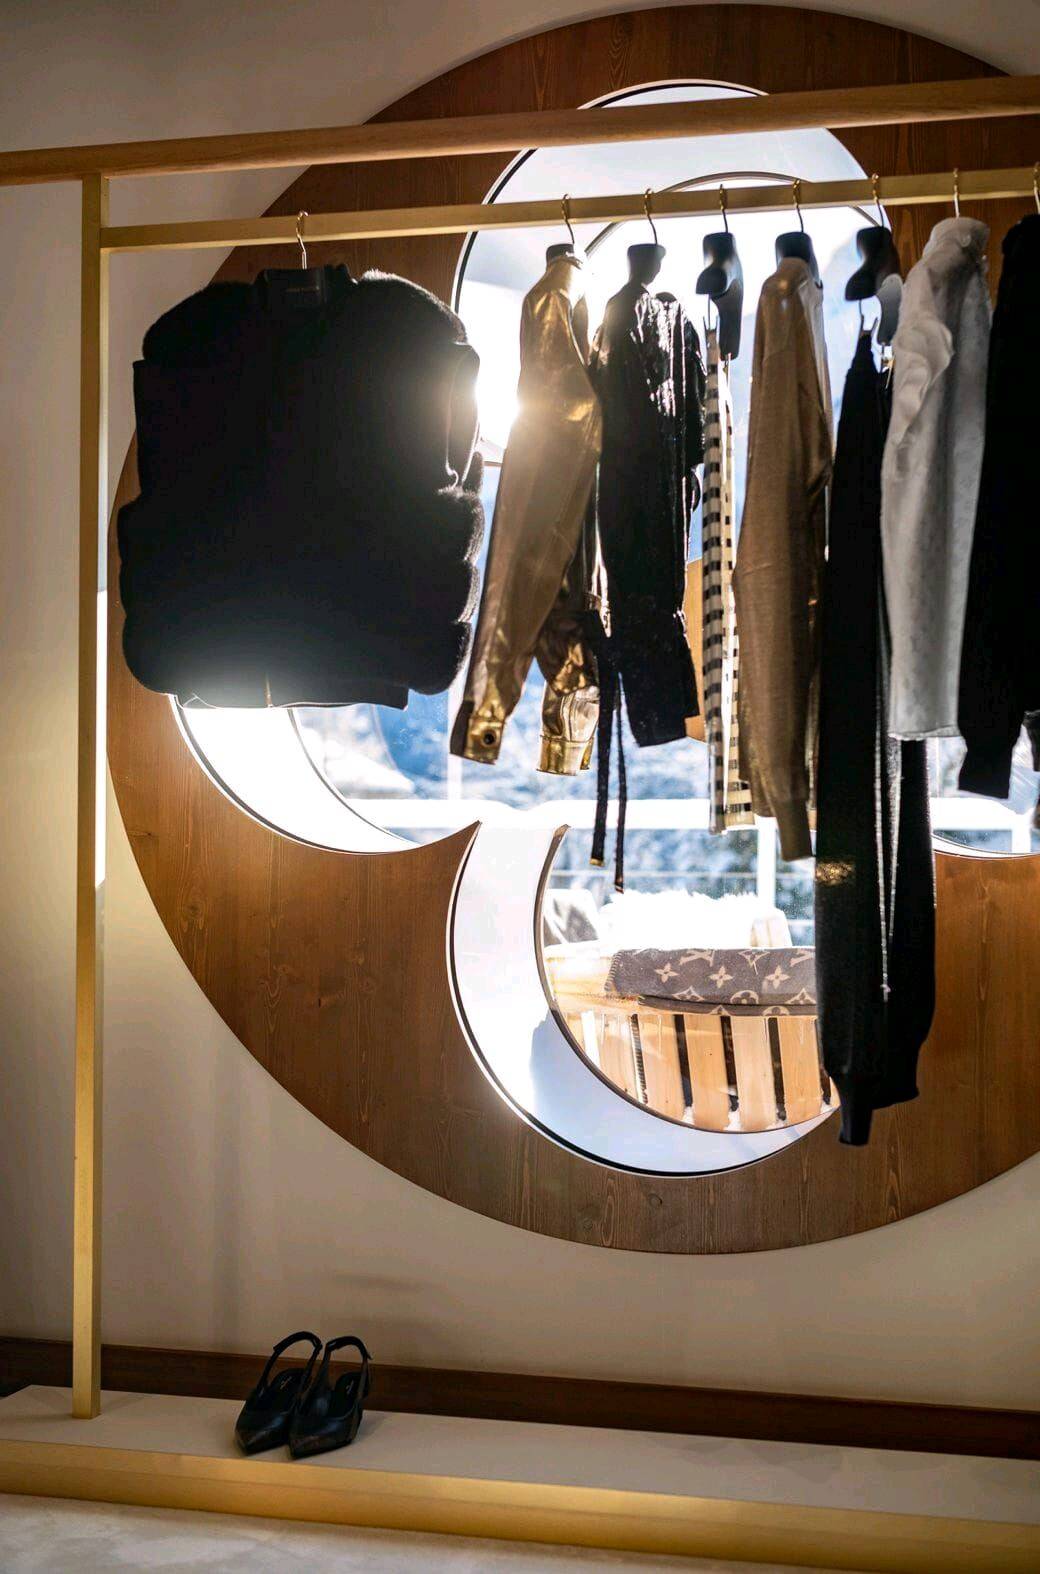 Louis Vuitton pop-up boutiques in St. Moritz and Courchevel are